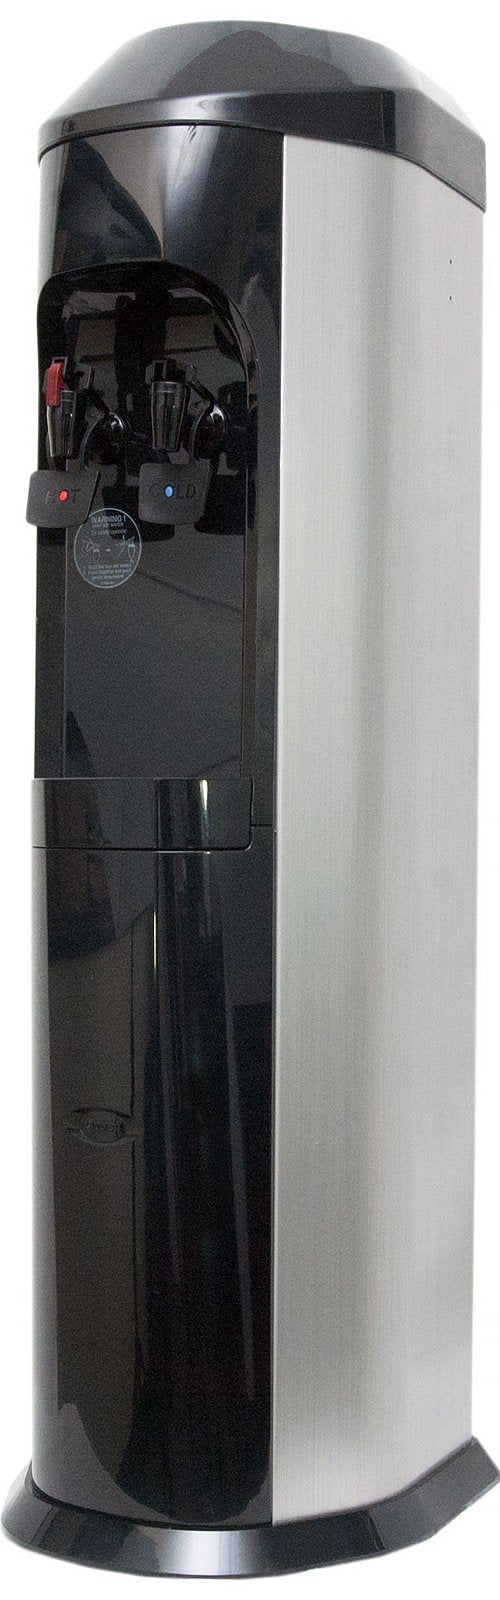 Clover D14A Hot and Cold Bottleless Water Dispenser with Install Kit and Filter